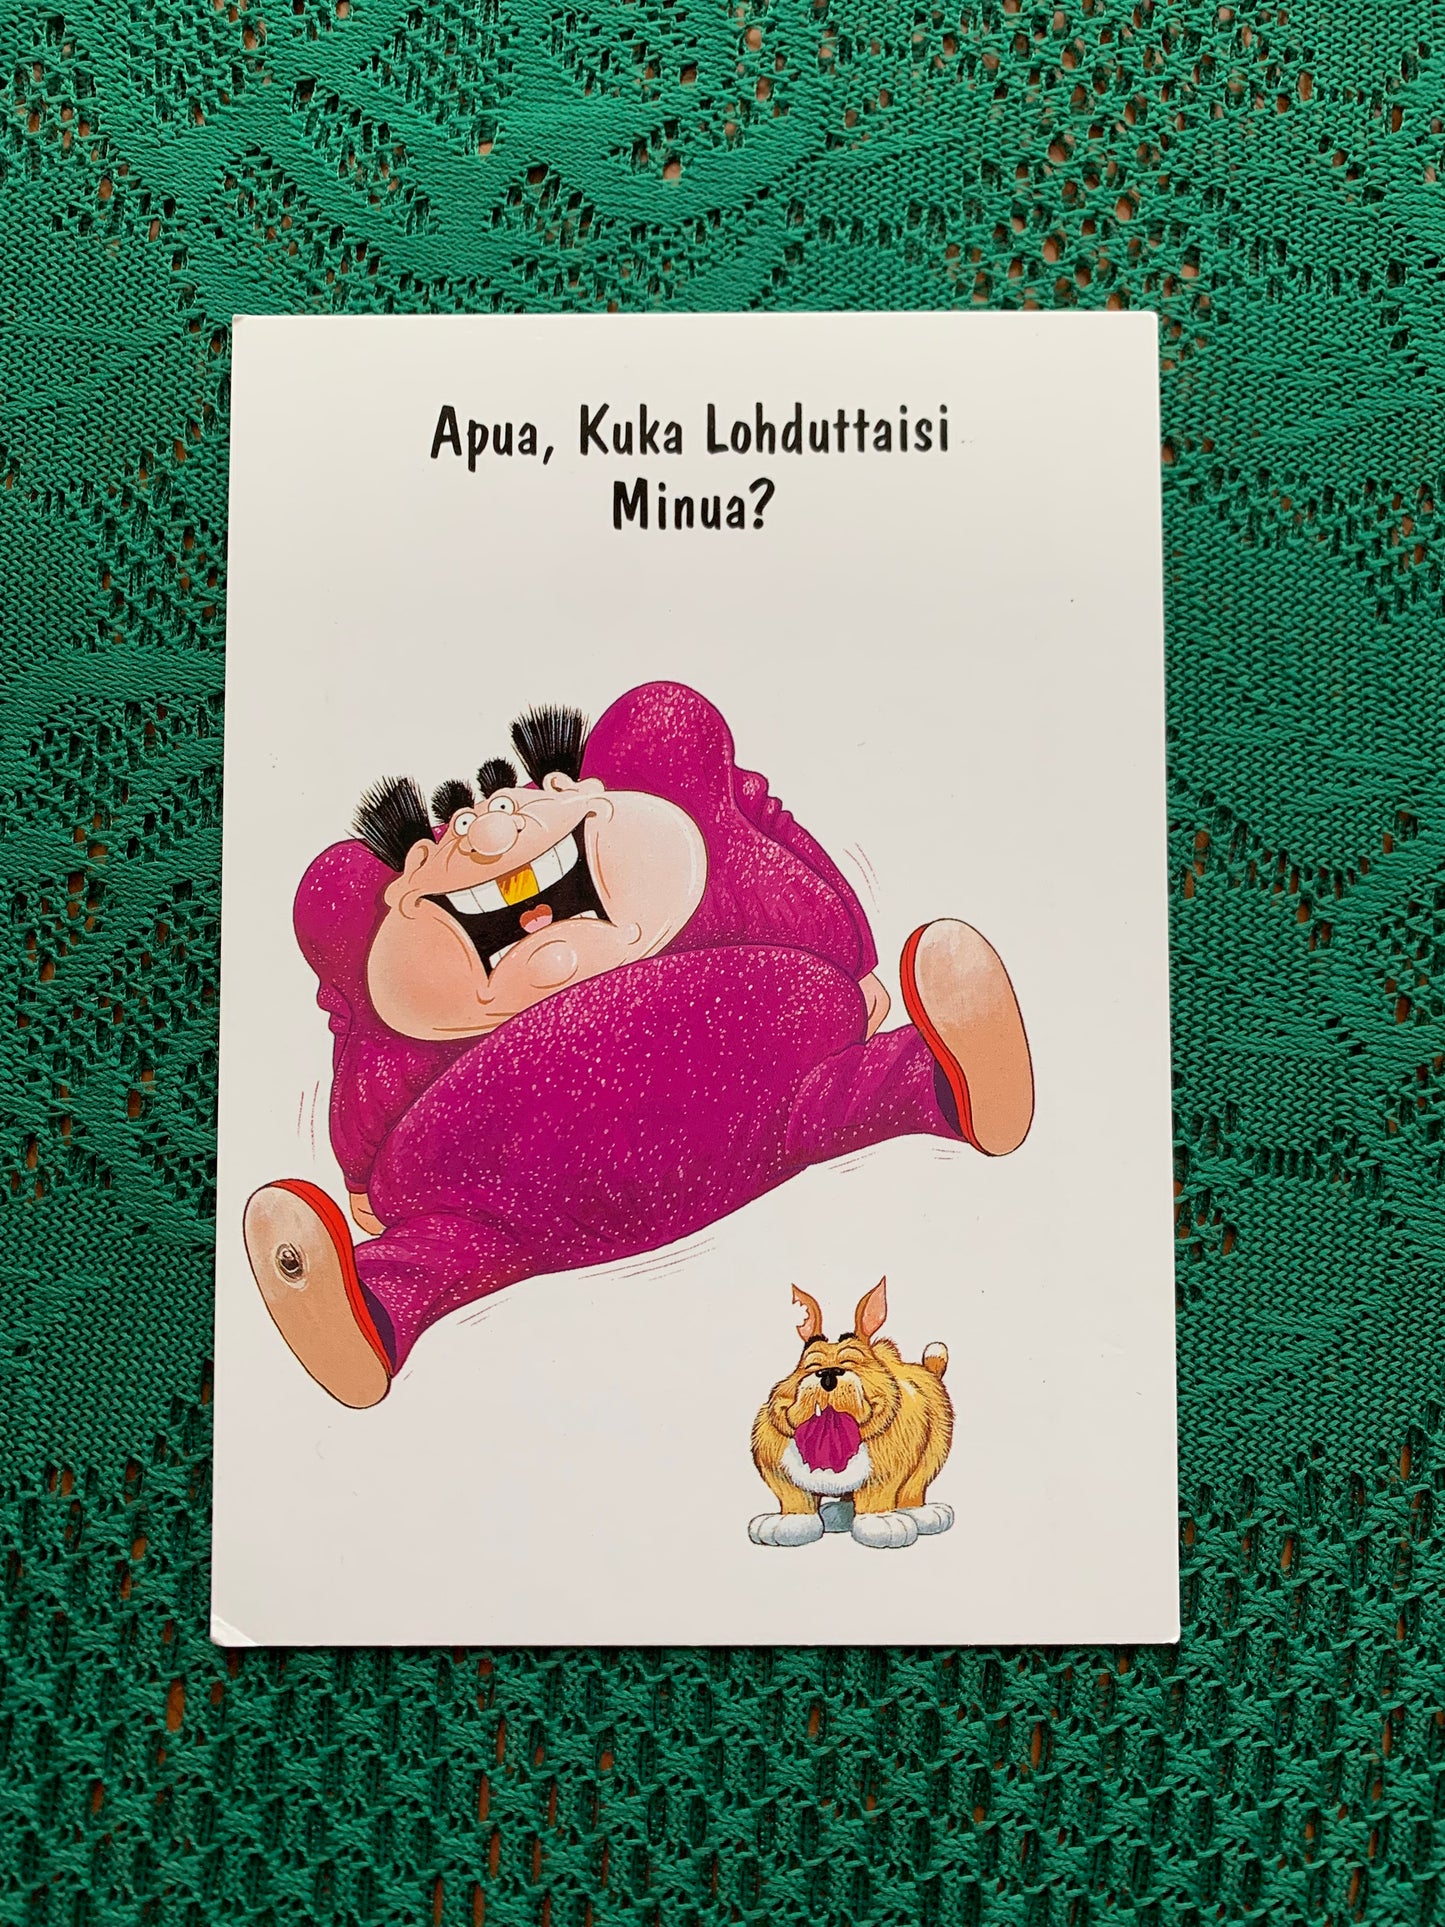 Vintage humour postcard - Printed in UK - Frank Fehmers Productions - Text in Finnish. "Help, Who Would Comfort Me?" - unused